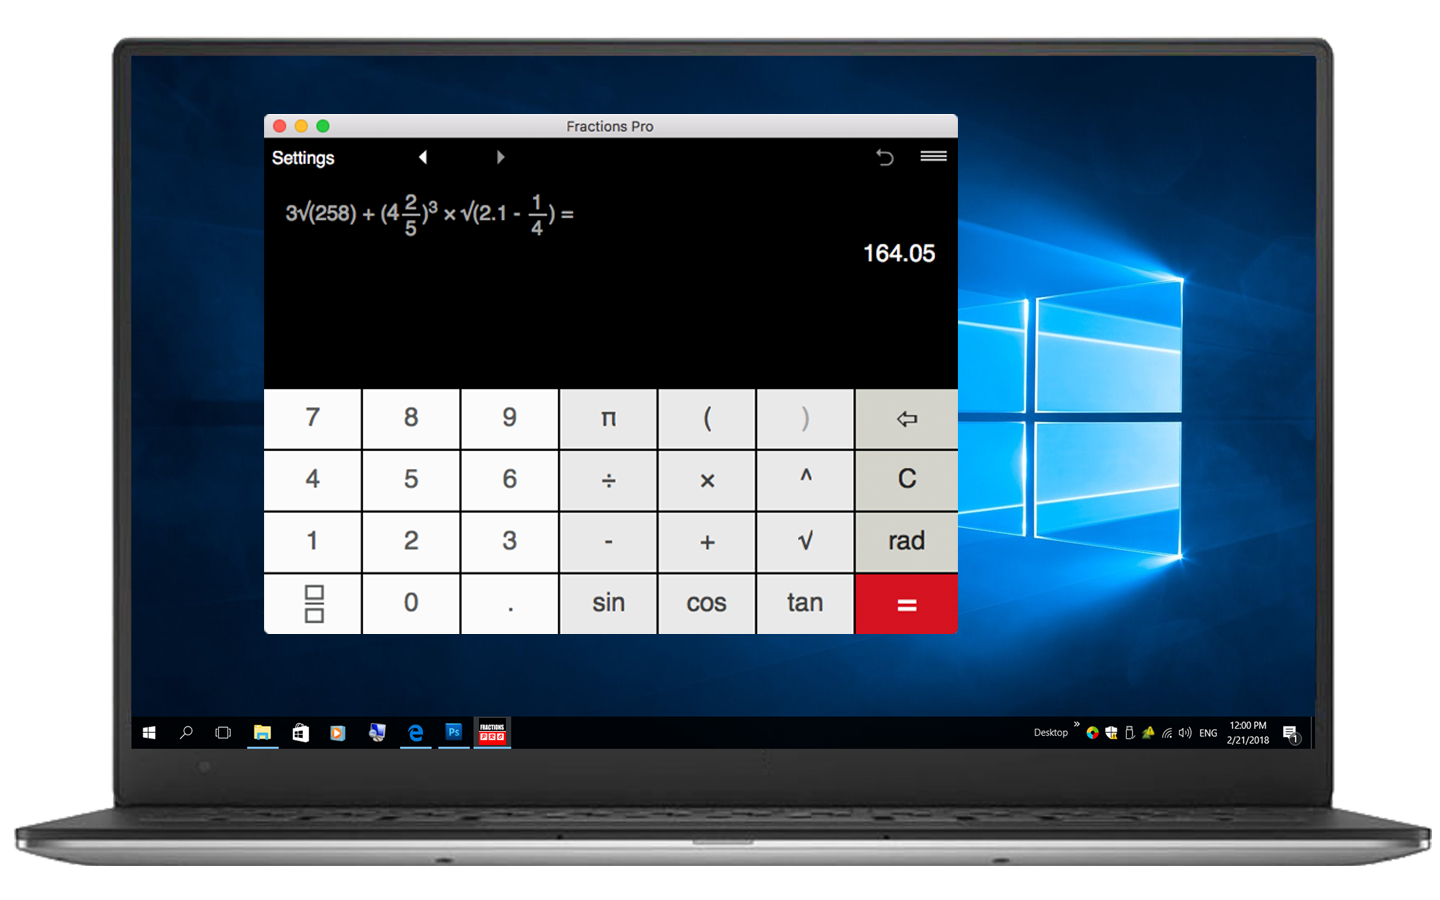 Fractions Pro for Windows